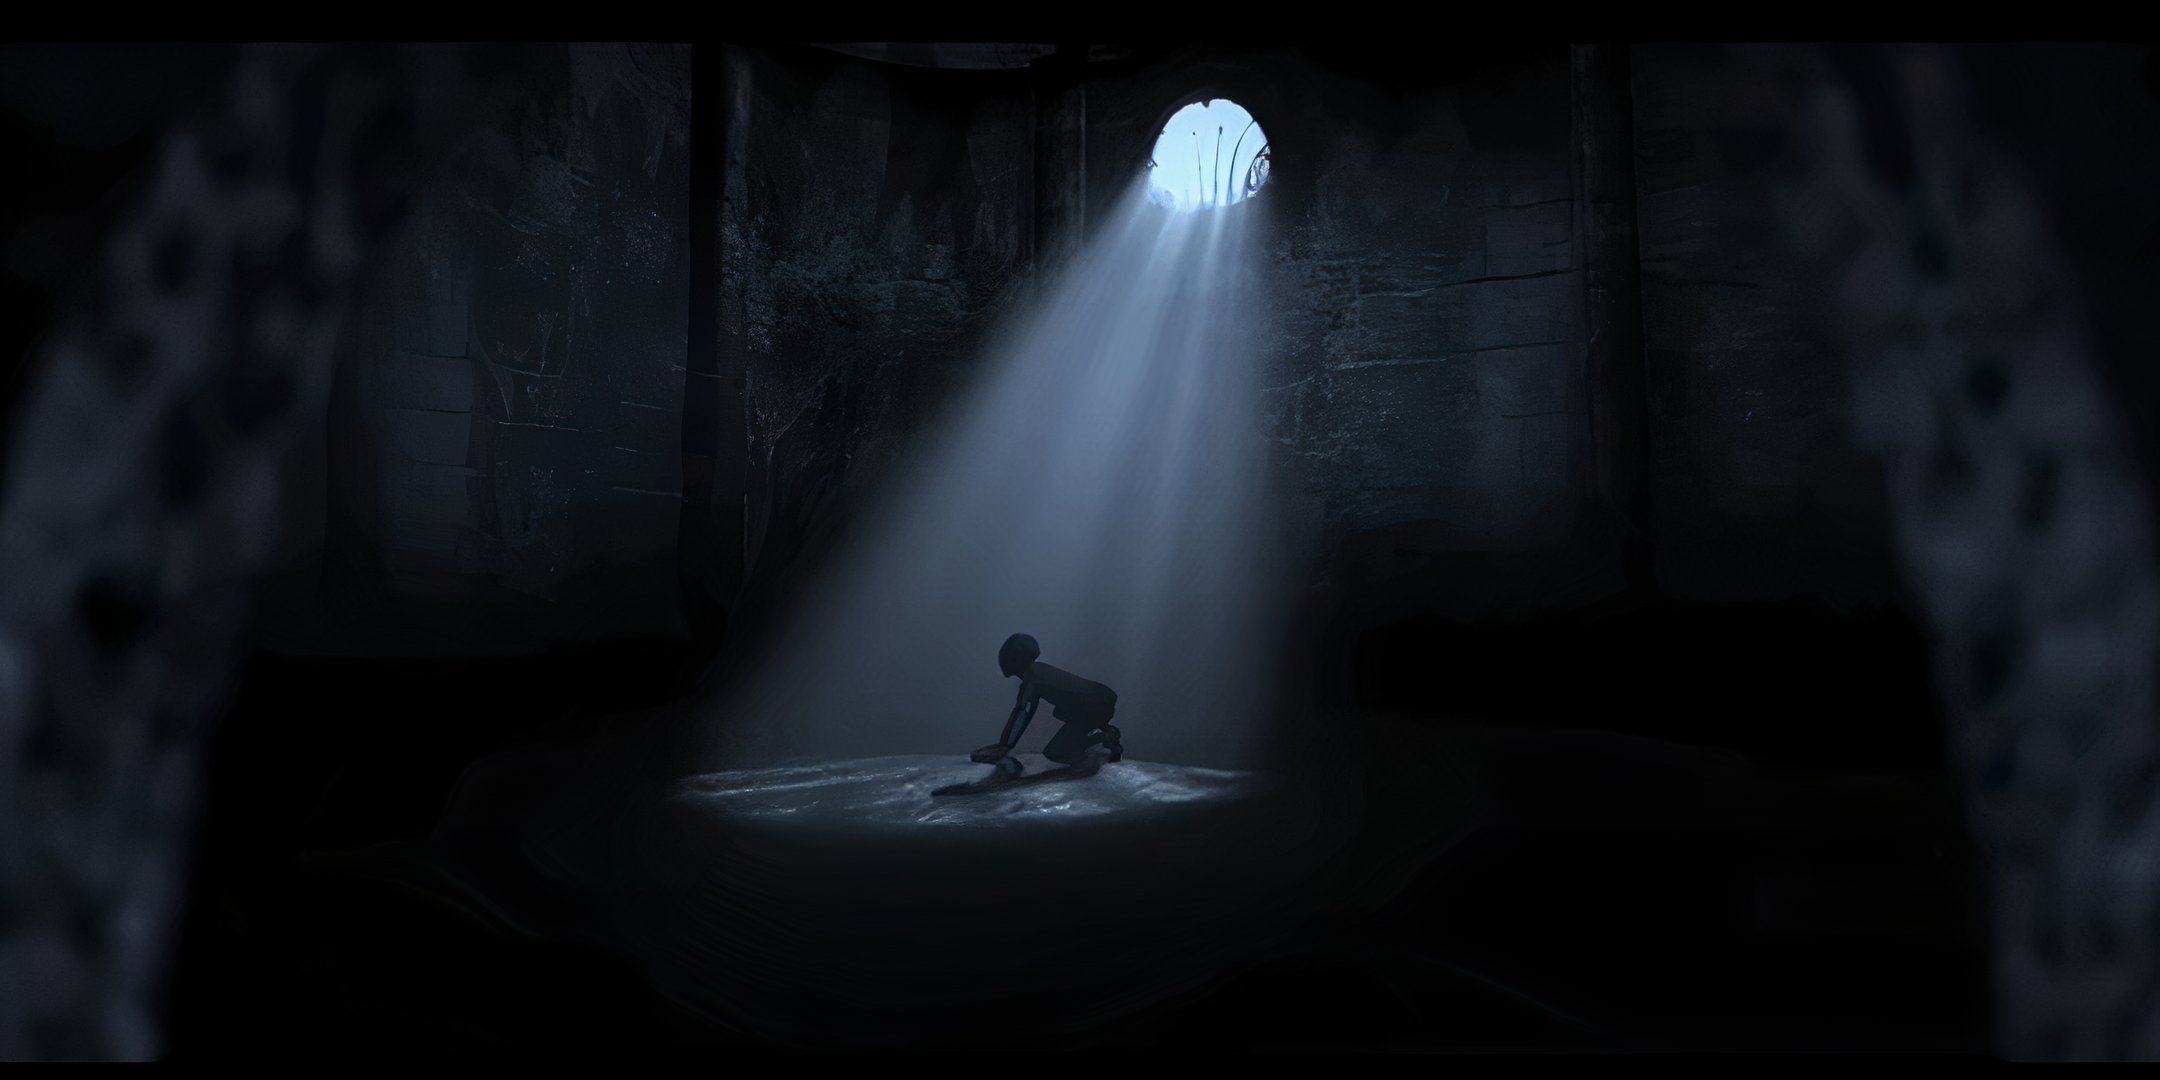 gollum illuminated by a beam of light in lord of the rings hunt for gollum fan film